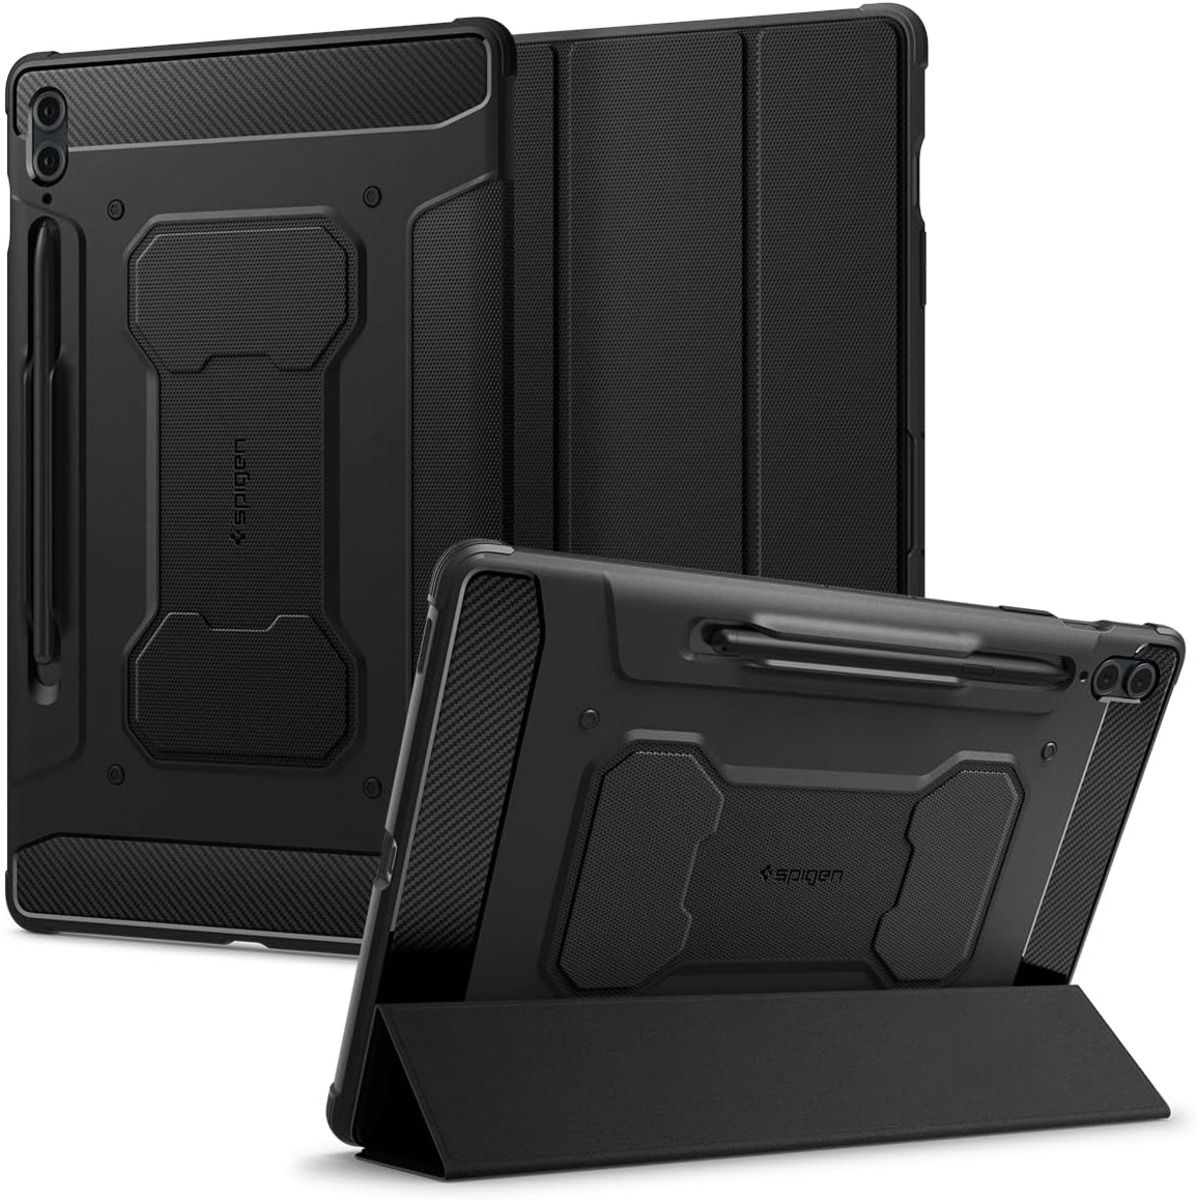  Spigen Rugged Armor Pro for Galaxy Tab S9 FE+ against a white background